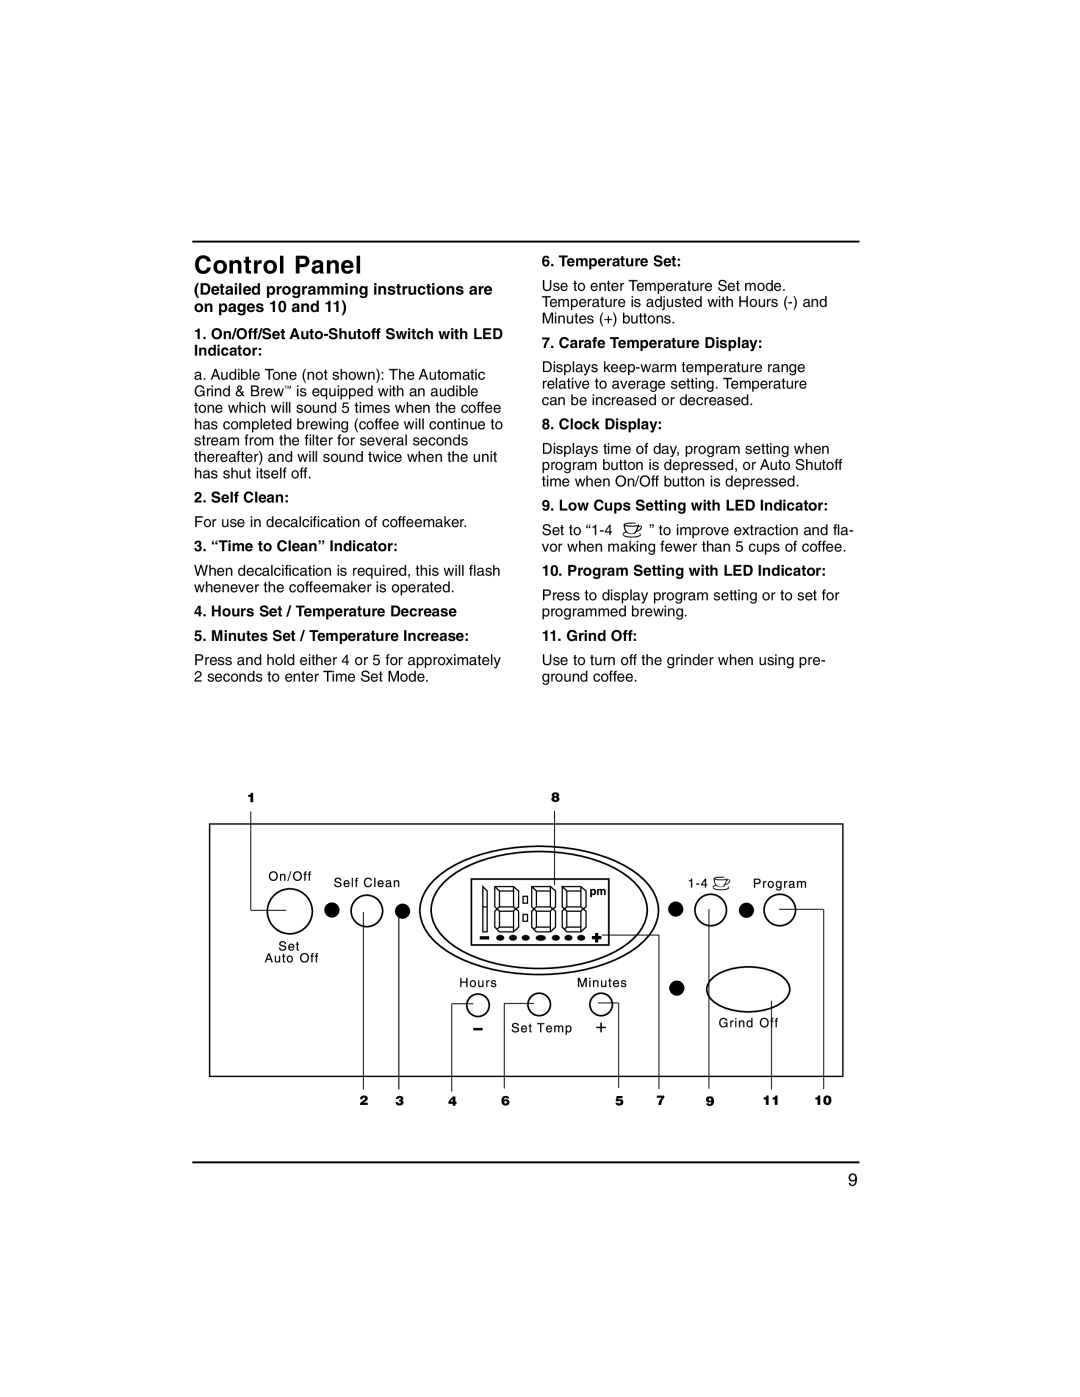 Cuisinart dgb300 manual Control Panel, Detailed programming instructions are on pages 10 and, Self Clean, Temperature Set 